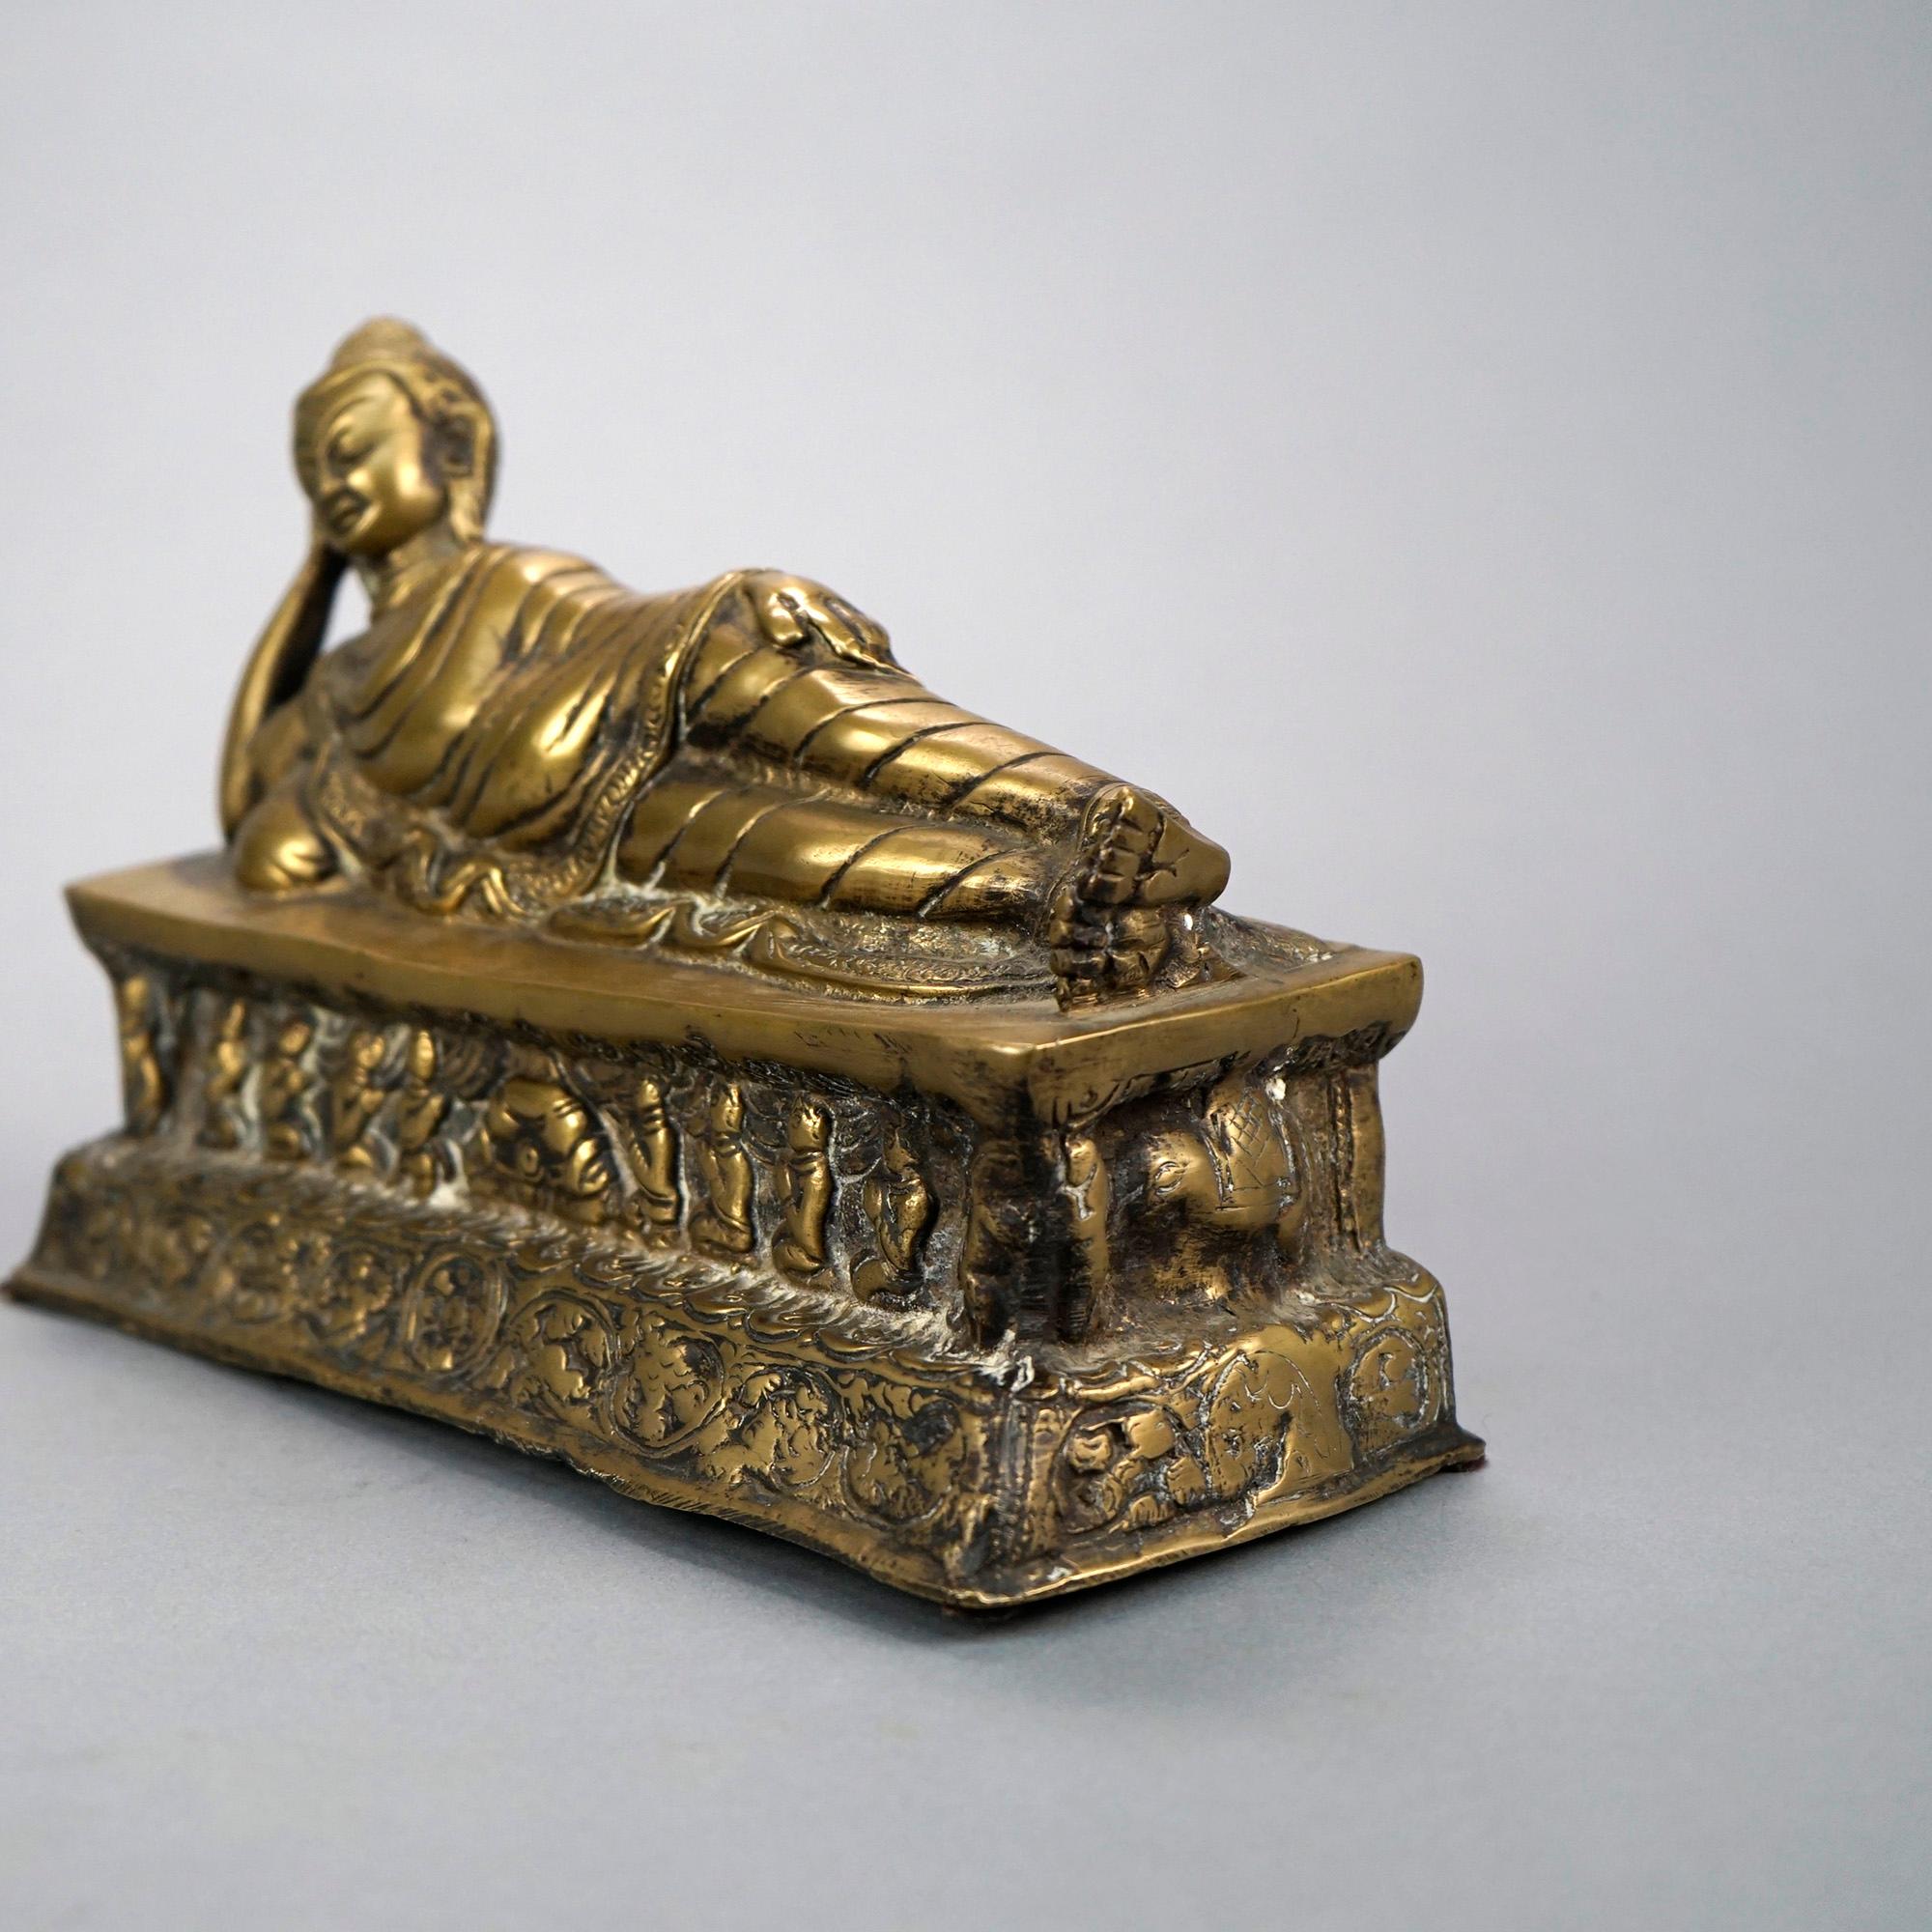 An oriental Asian cast bronze sculpture offers reclining Shiva on plinth having foliate and praying figures, 20th century

Measures- 6'' H x 9.5'' W x 4'' D.

Catalogue Note: Ask about DISCOUNTED DELIVERY RATES available to most regions within 1,500